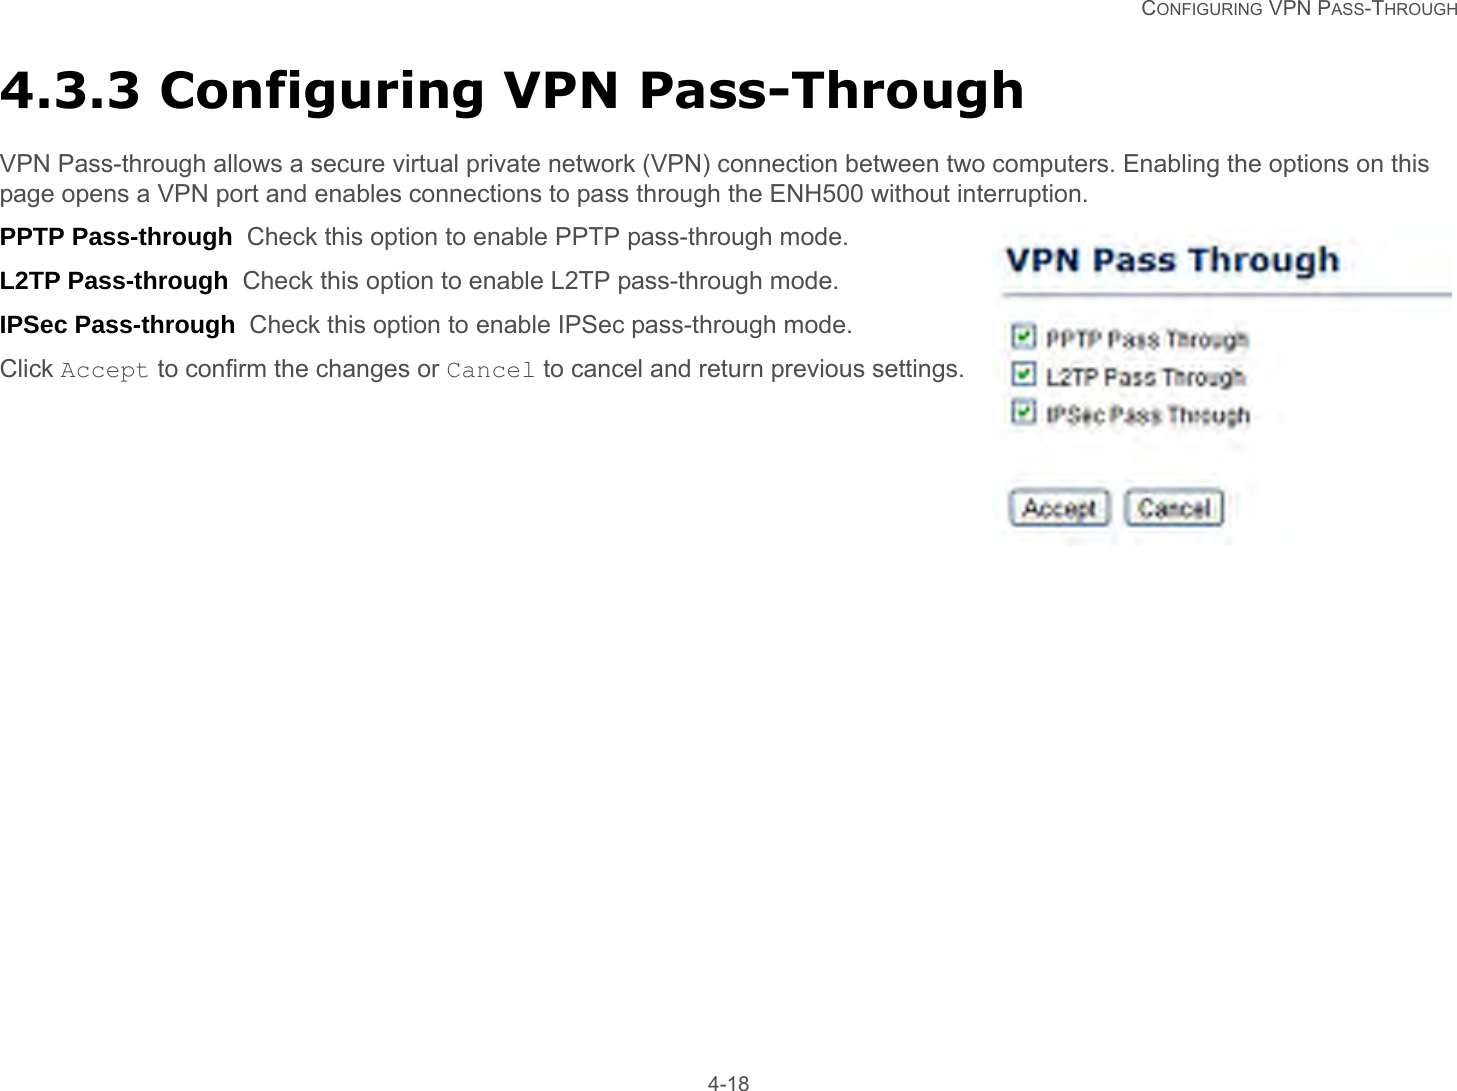   CONFIGURING VPN PASS-THROUGH 4-184.3.3 Configuring VPN Pass-ThroughVPN Pass-through allows a secure virtual private network (VPN) connection between two computers. Enabling the options on this page opens a VPN port and enables connections to pass through the ENH500 without interruption.PPTP Pass-through  Check this option to enable PPTP pass-through mode.L2TP Pass-through  Check this option to enable L2TP pass-through mode.IPSec Pass-through  Check this option to enable IPSec pass-through mode.Click Accept to confirm the changes or Cancel to cancel and return previous settings.